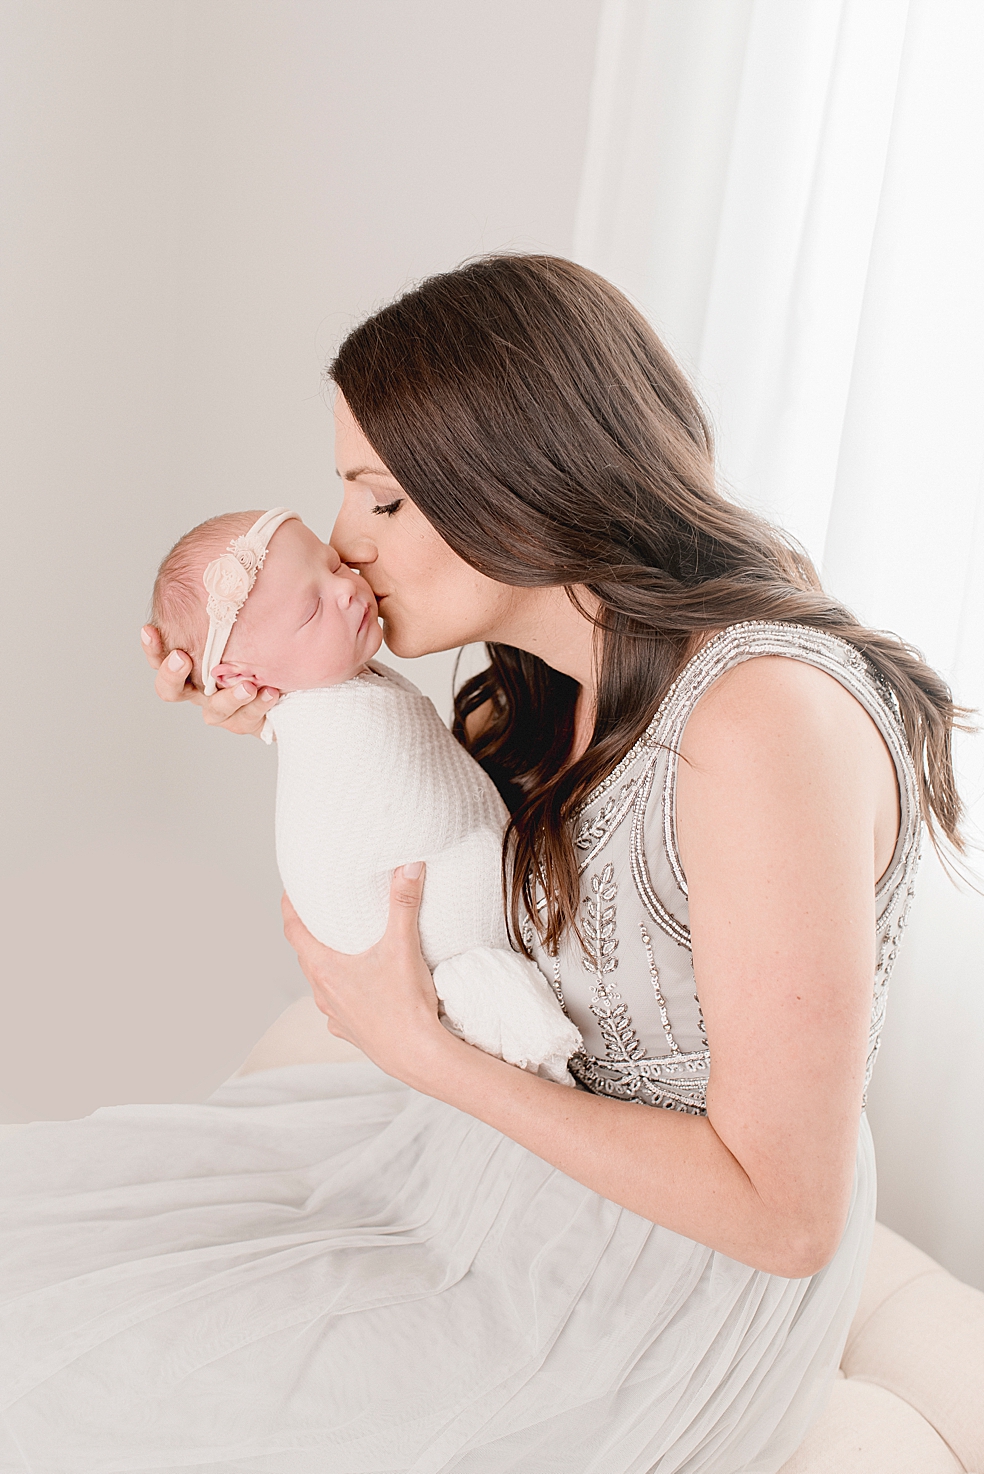 Mom kissing newborn baby girl on cheek | Photo by Jessica Lee Photography